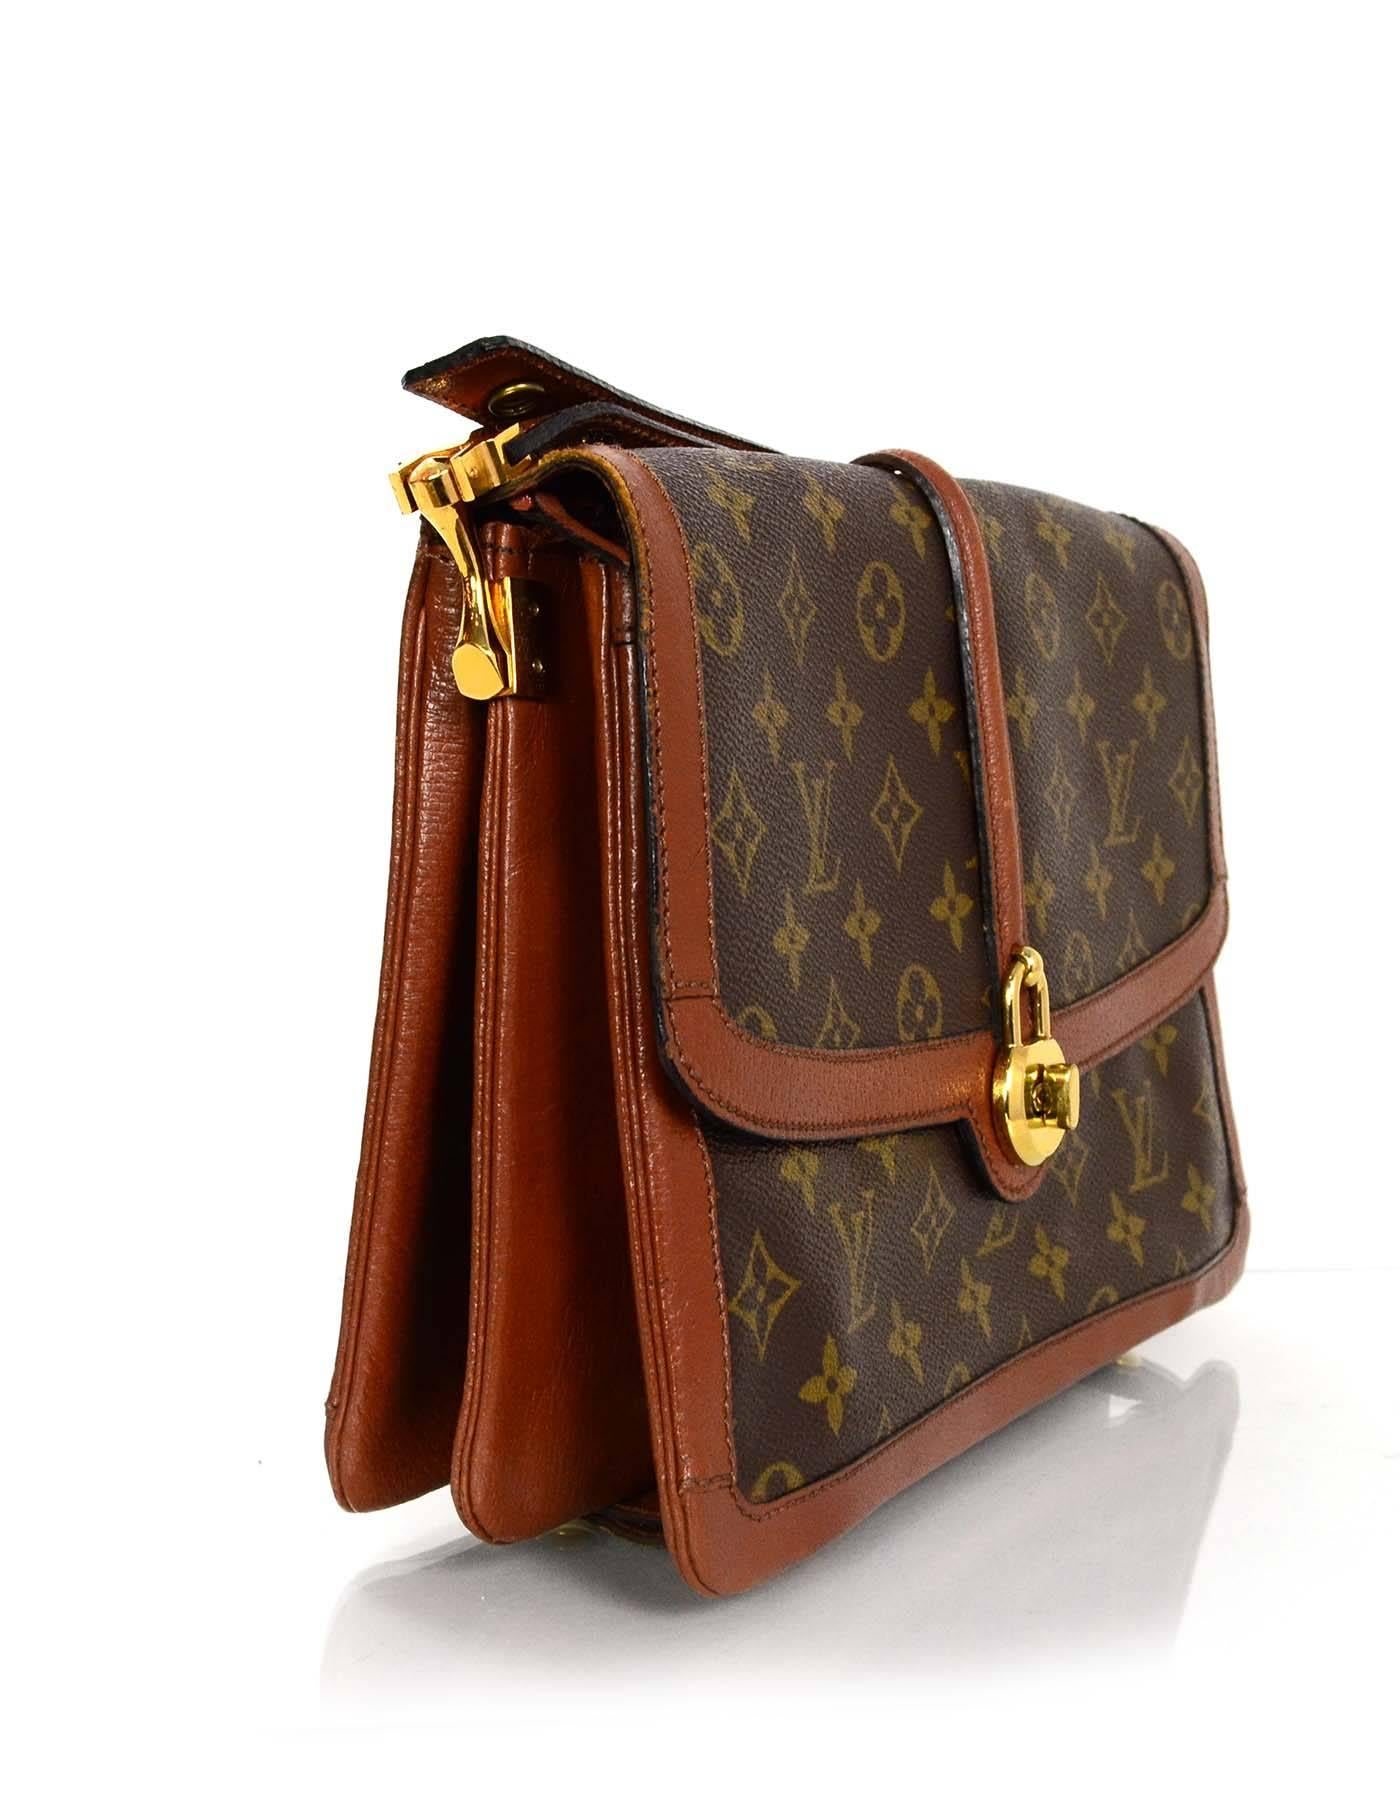 Louis Vuitton Vintage Monogram Flap Bag
Features leather trim throughout exterior and adjustable shoulder/crossbody strap

Made In: France
Color: Brown and tan
Hardware: Goldtone
Materials: Coated canvas and leather
Lining: Brown